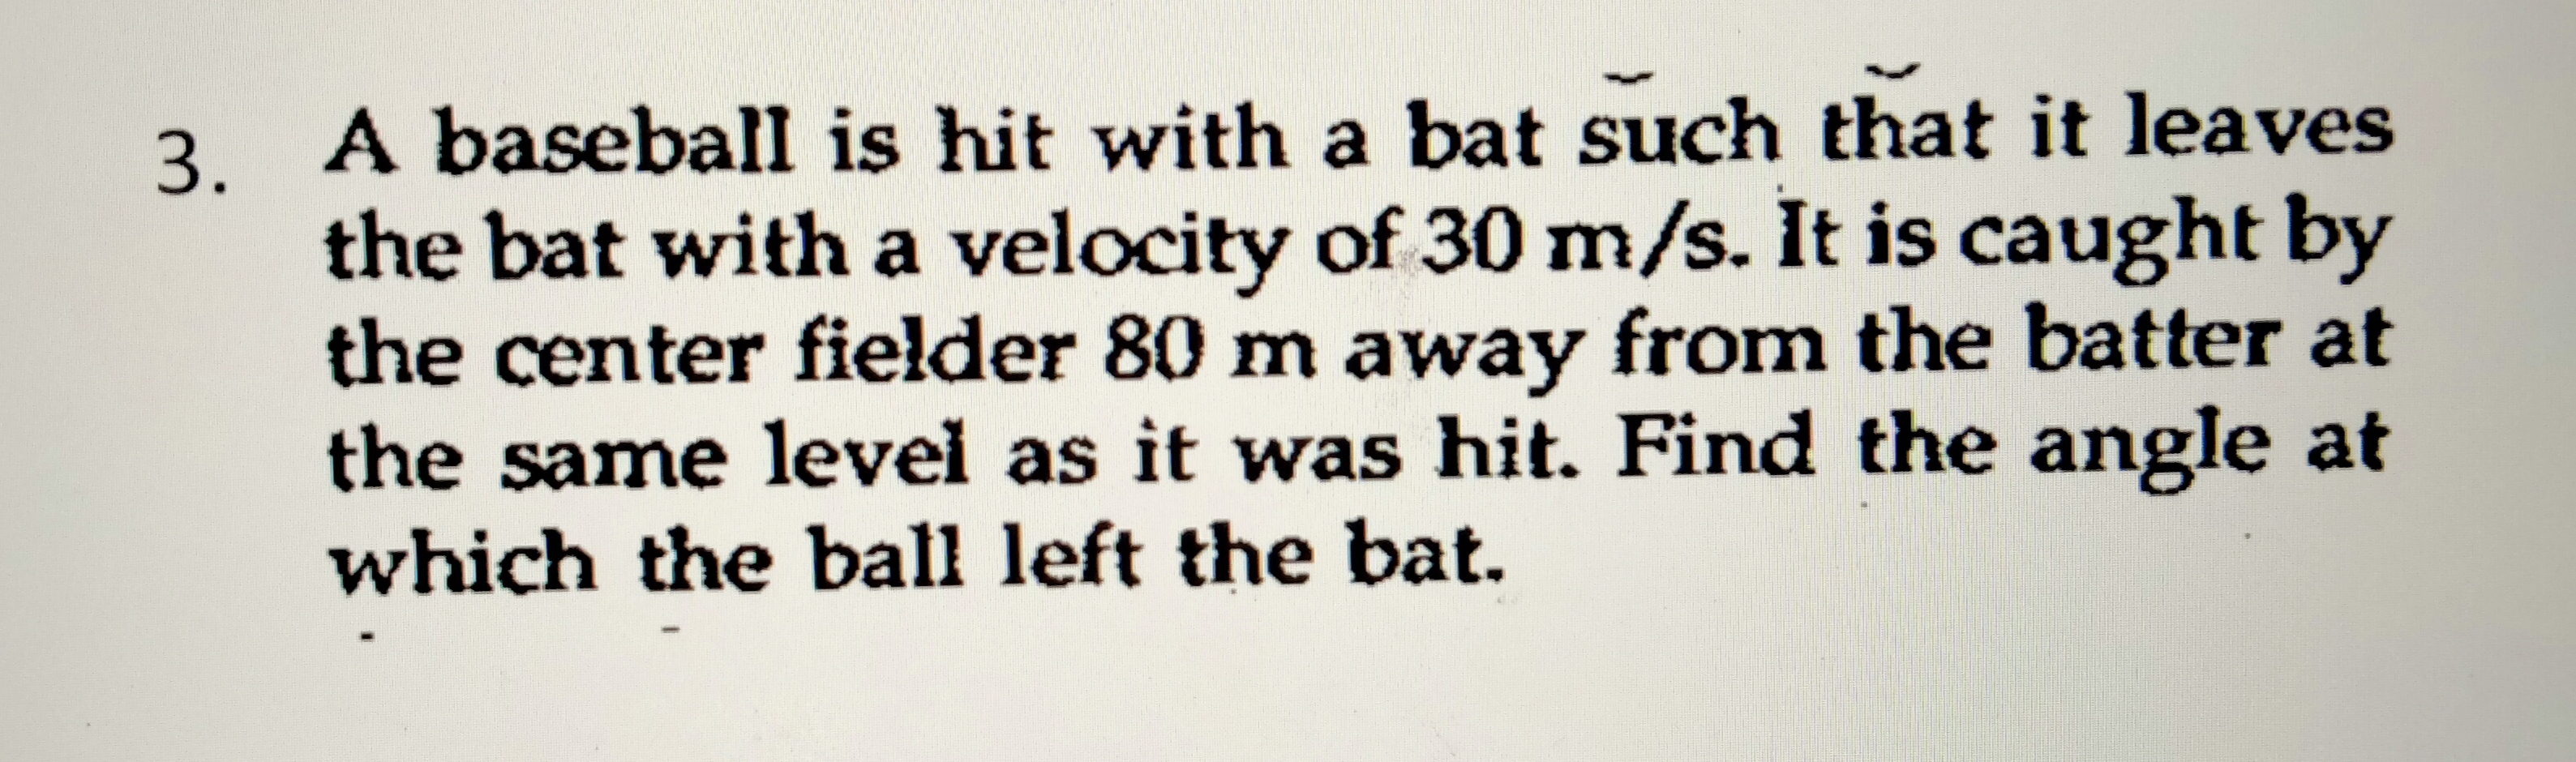 3. A baseball is hit with a bat such that it leaves
the bat with a velocity of 30 m/s. It is caught by
the center fielder 80 m away from the batter at
the same level as it was hit. Find the angle at
which the ball left the bat.
